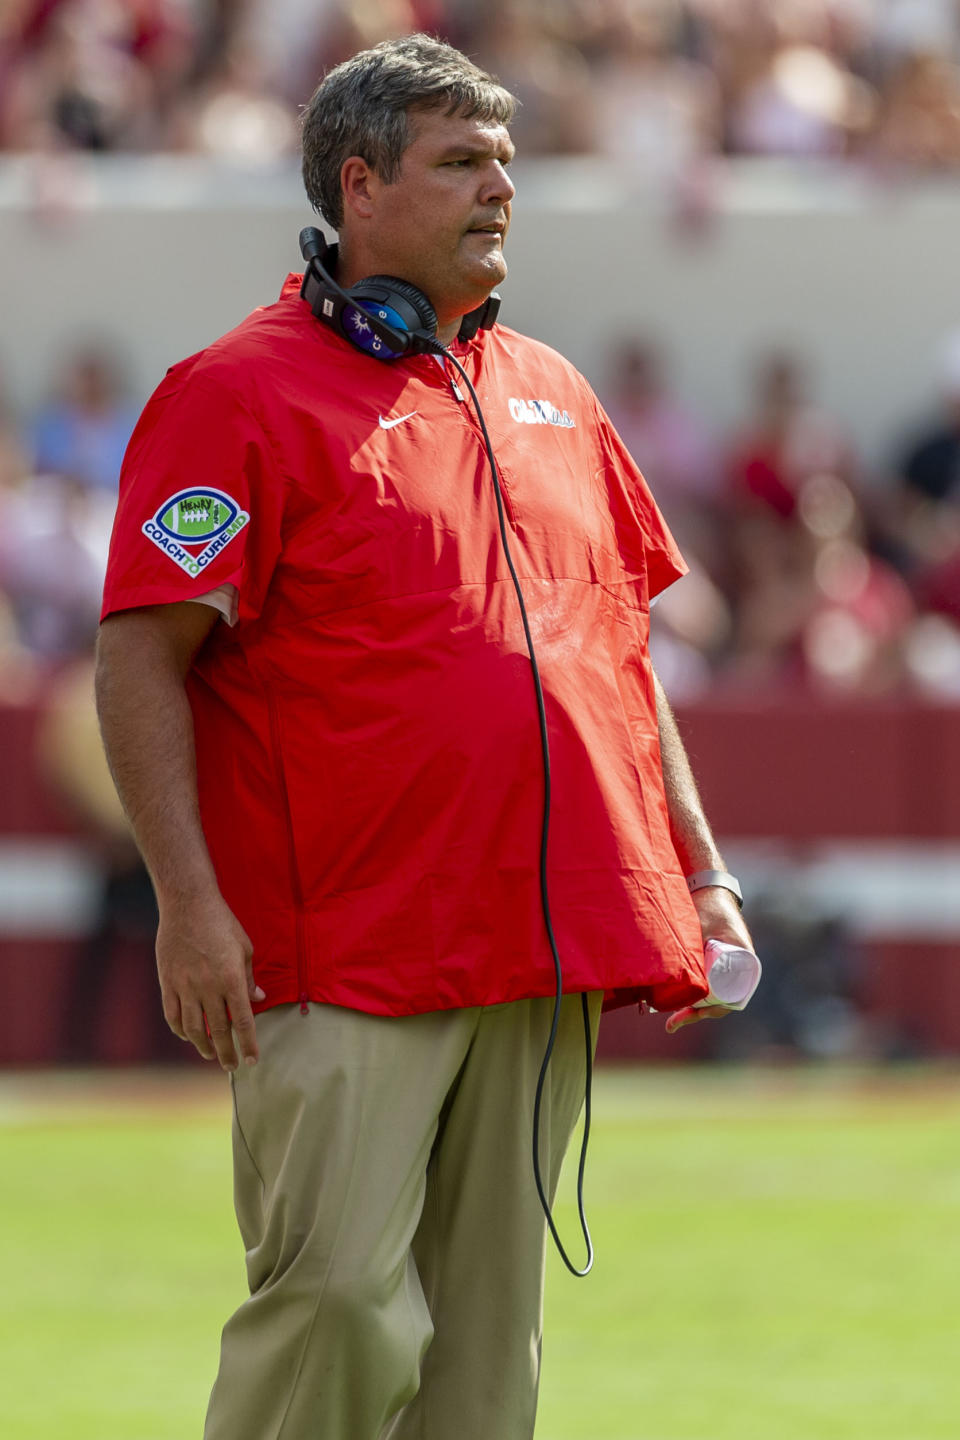 Mississippi head coach Matt Luke looks on after a referee's call during the first half of an NCAA college football game against Alabama, Saturday, Sept. 28, 2019, in Tuscaloosa, Ala. (AP Photo/Vasha Hunt)